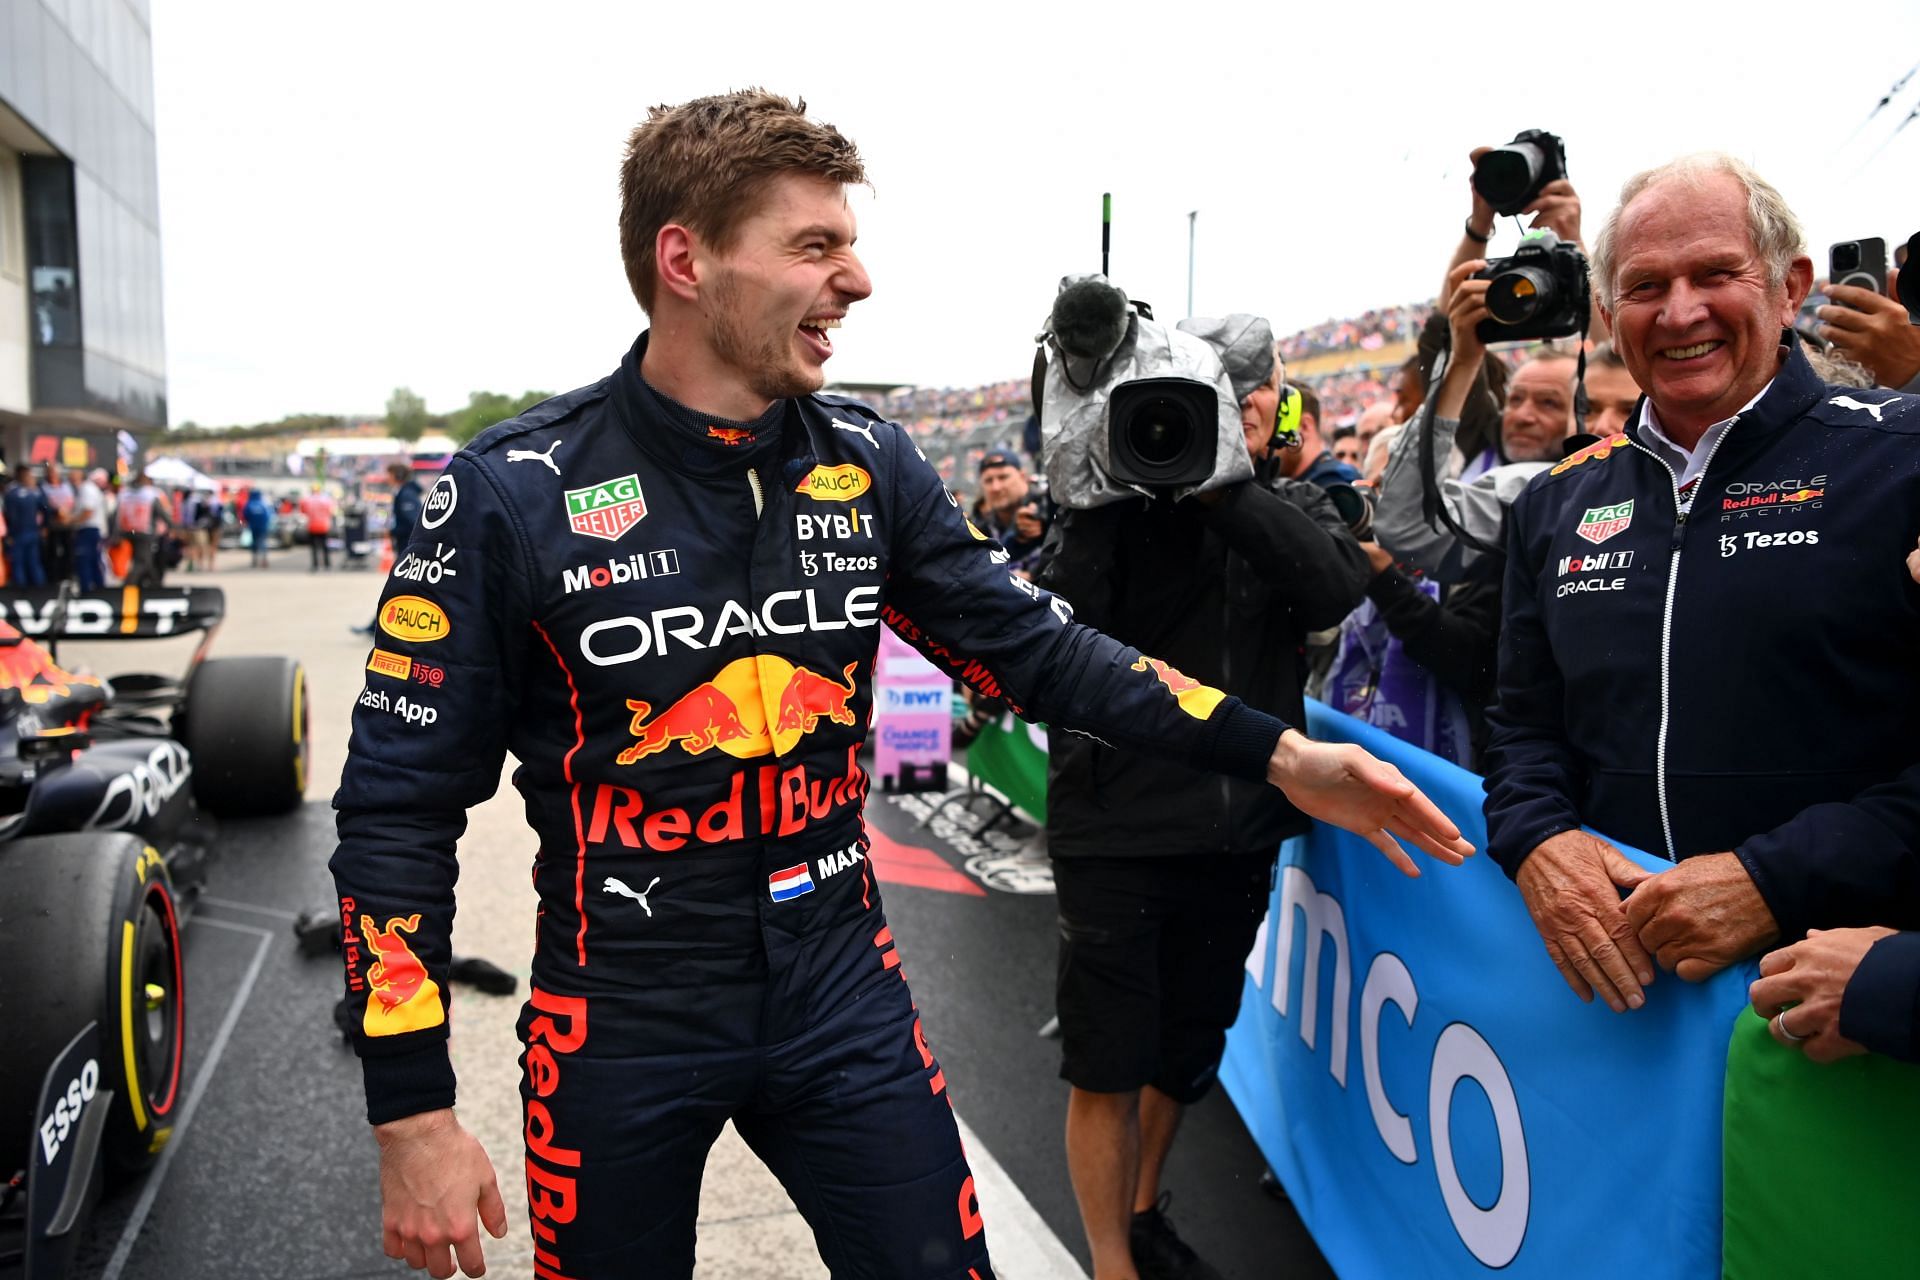 Verstappen was able to win the race despite the spin early in his last stint